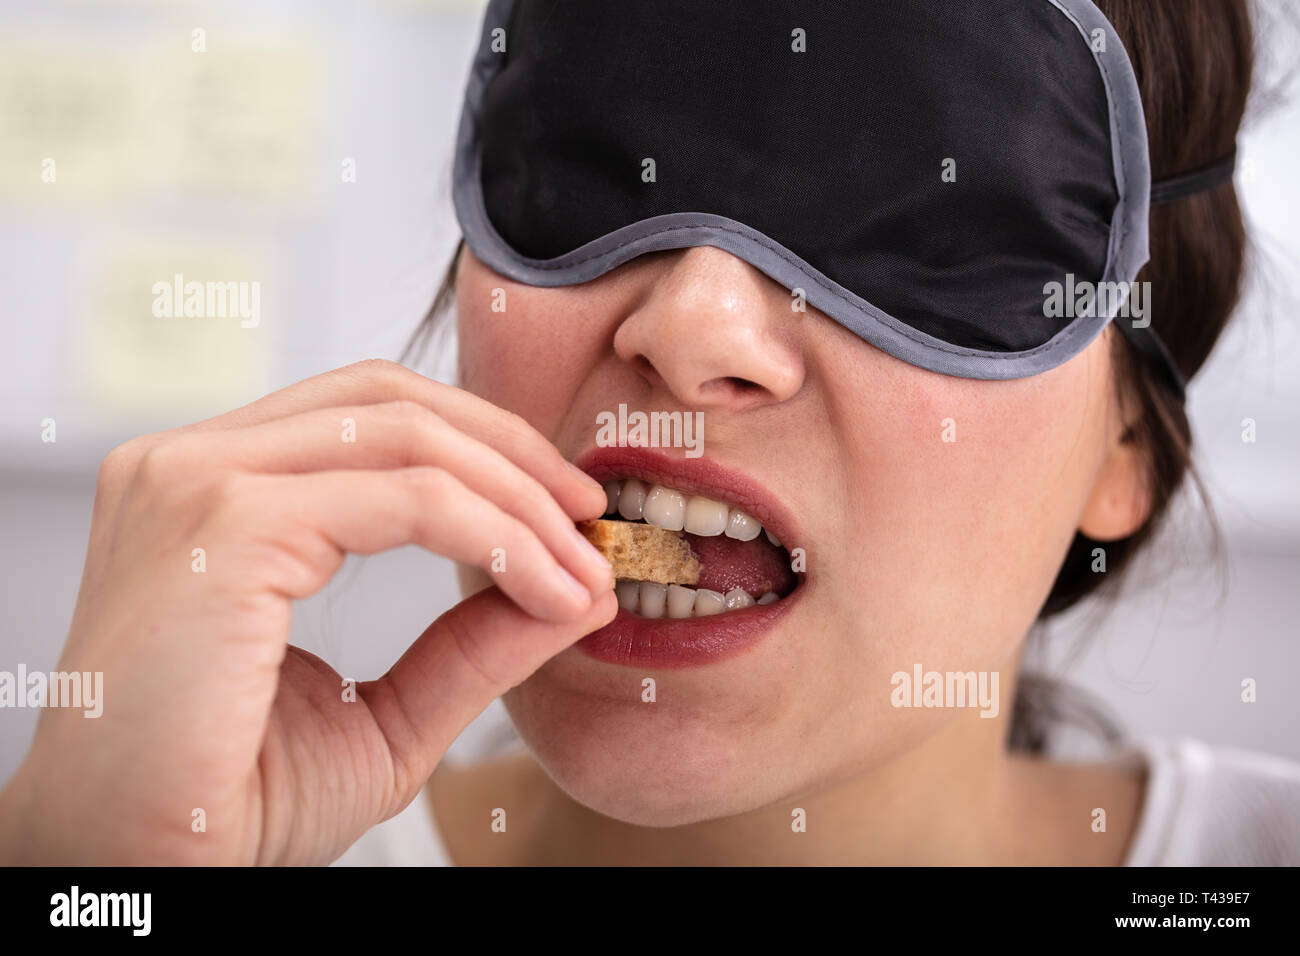 Blindfolded south american gal eats a large stick